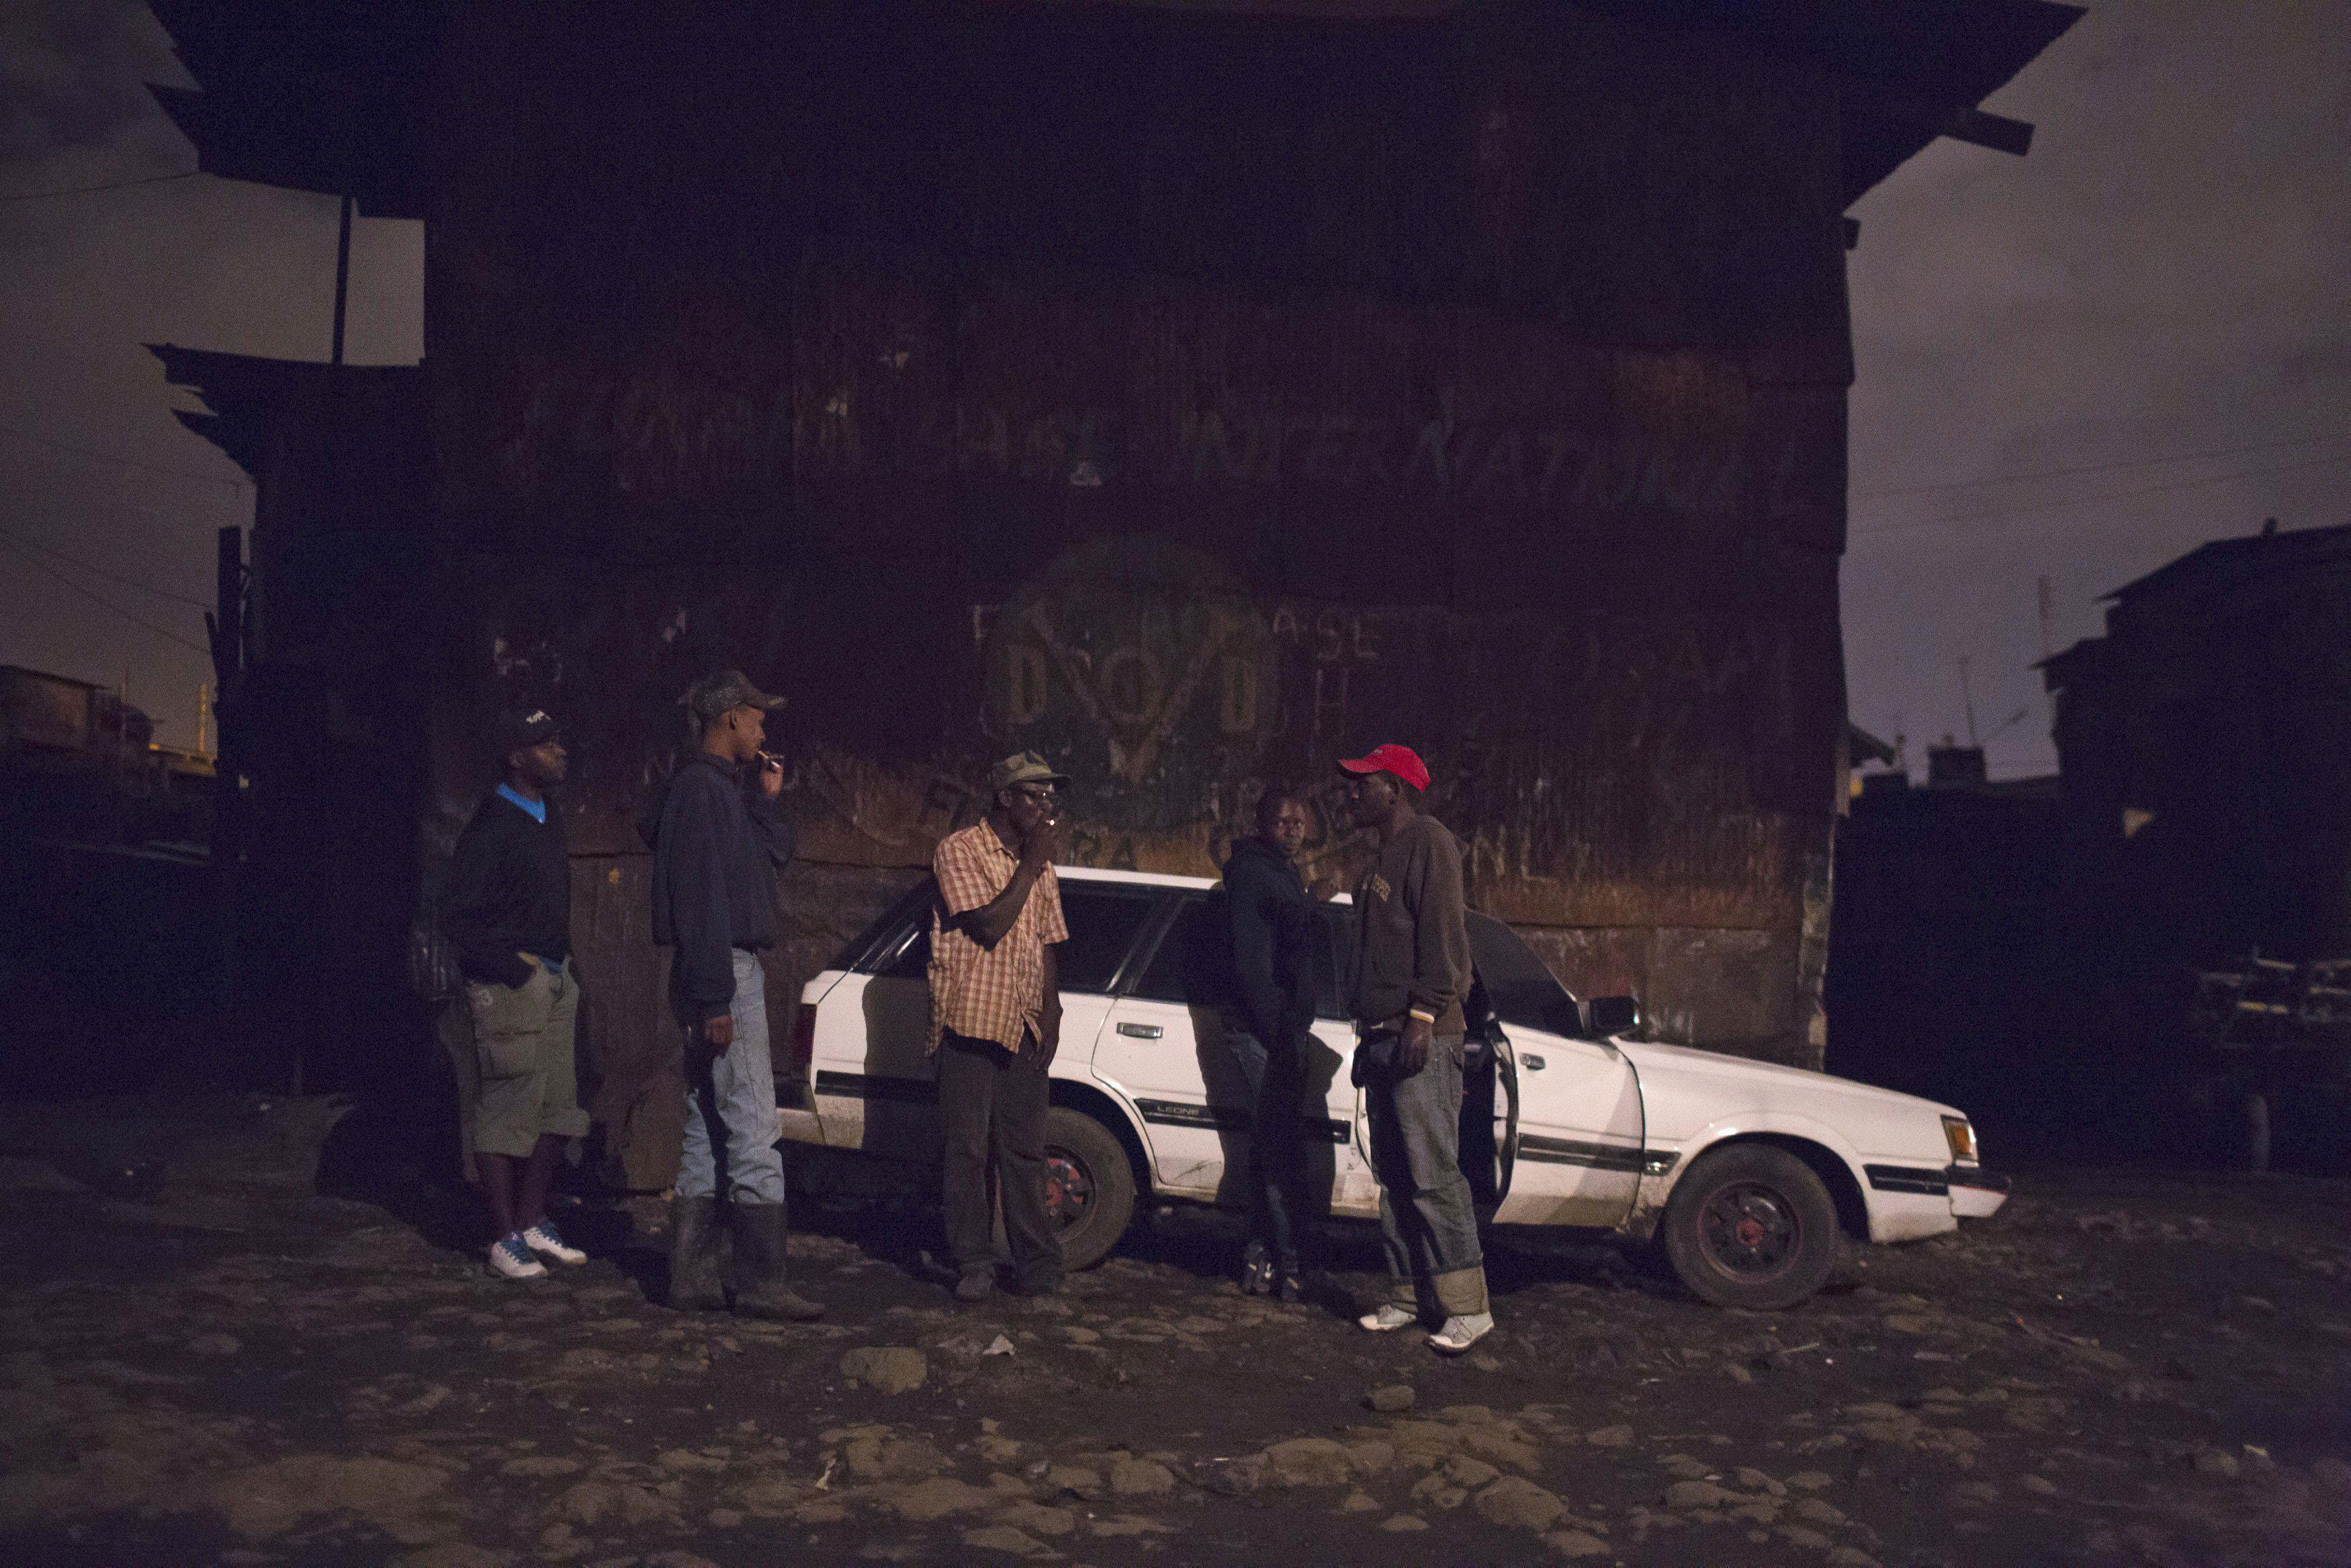 A group of men talk by a car after leaving a local bar in Majengo in Nairobi